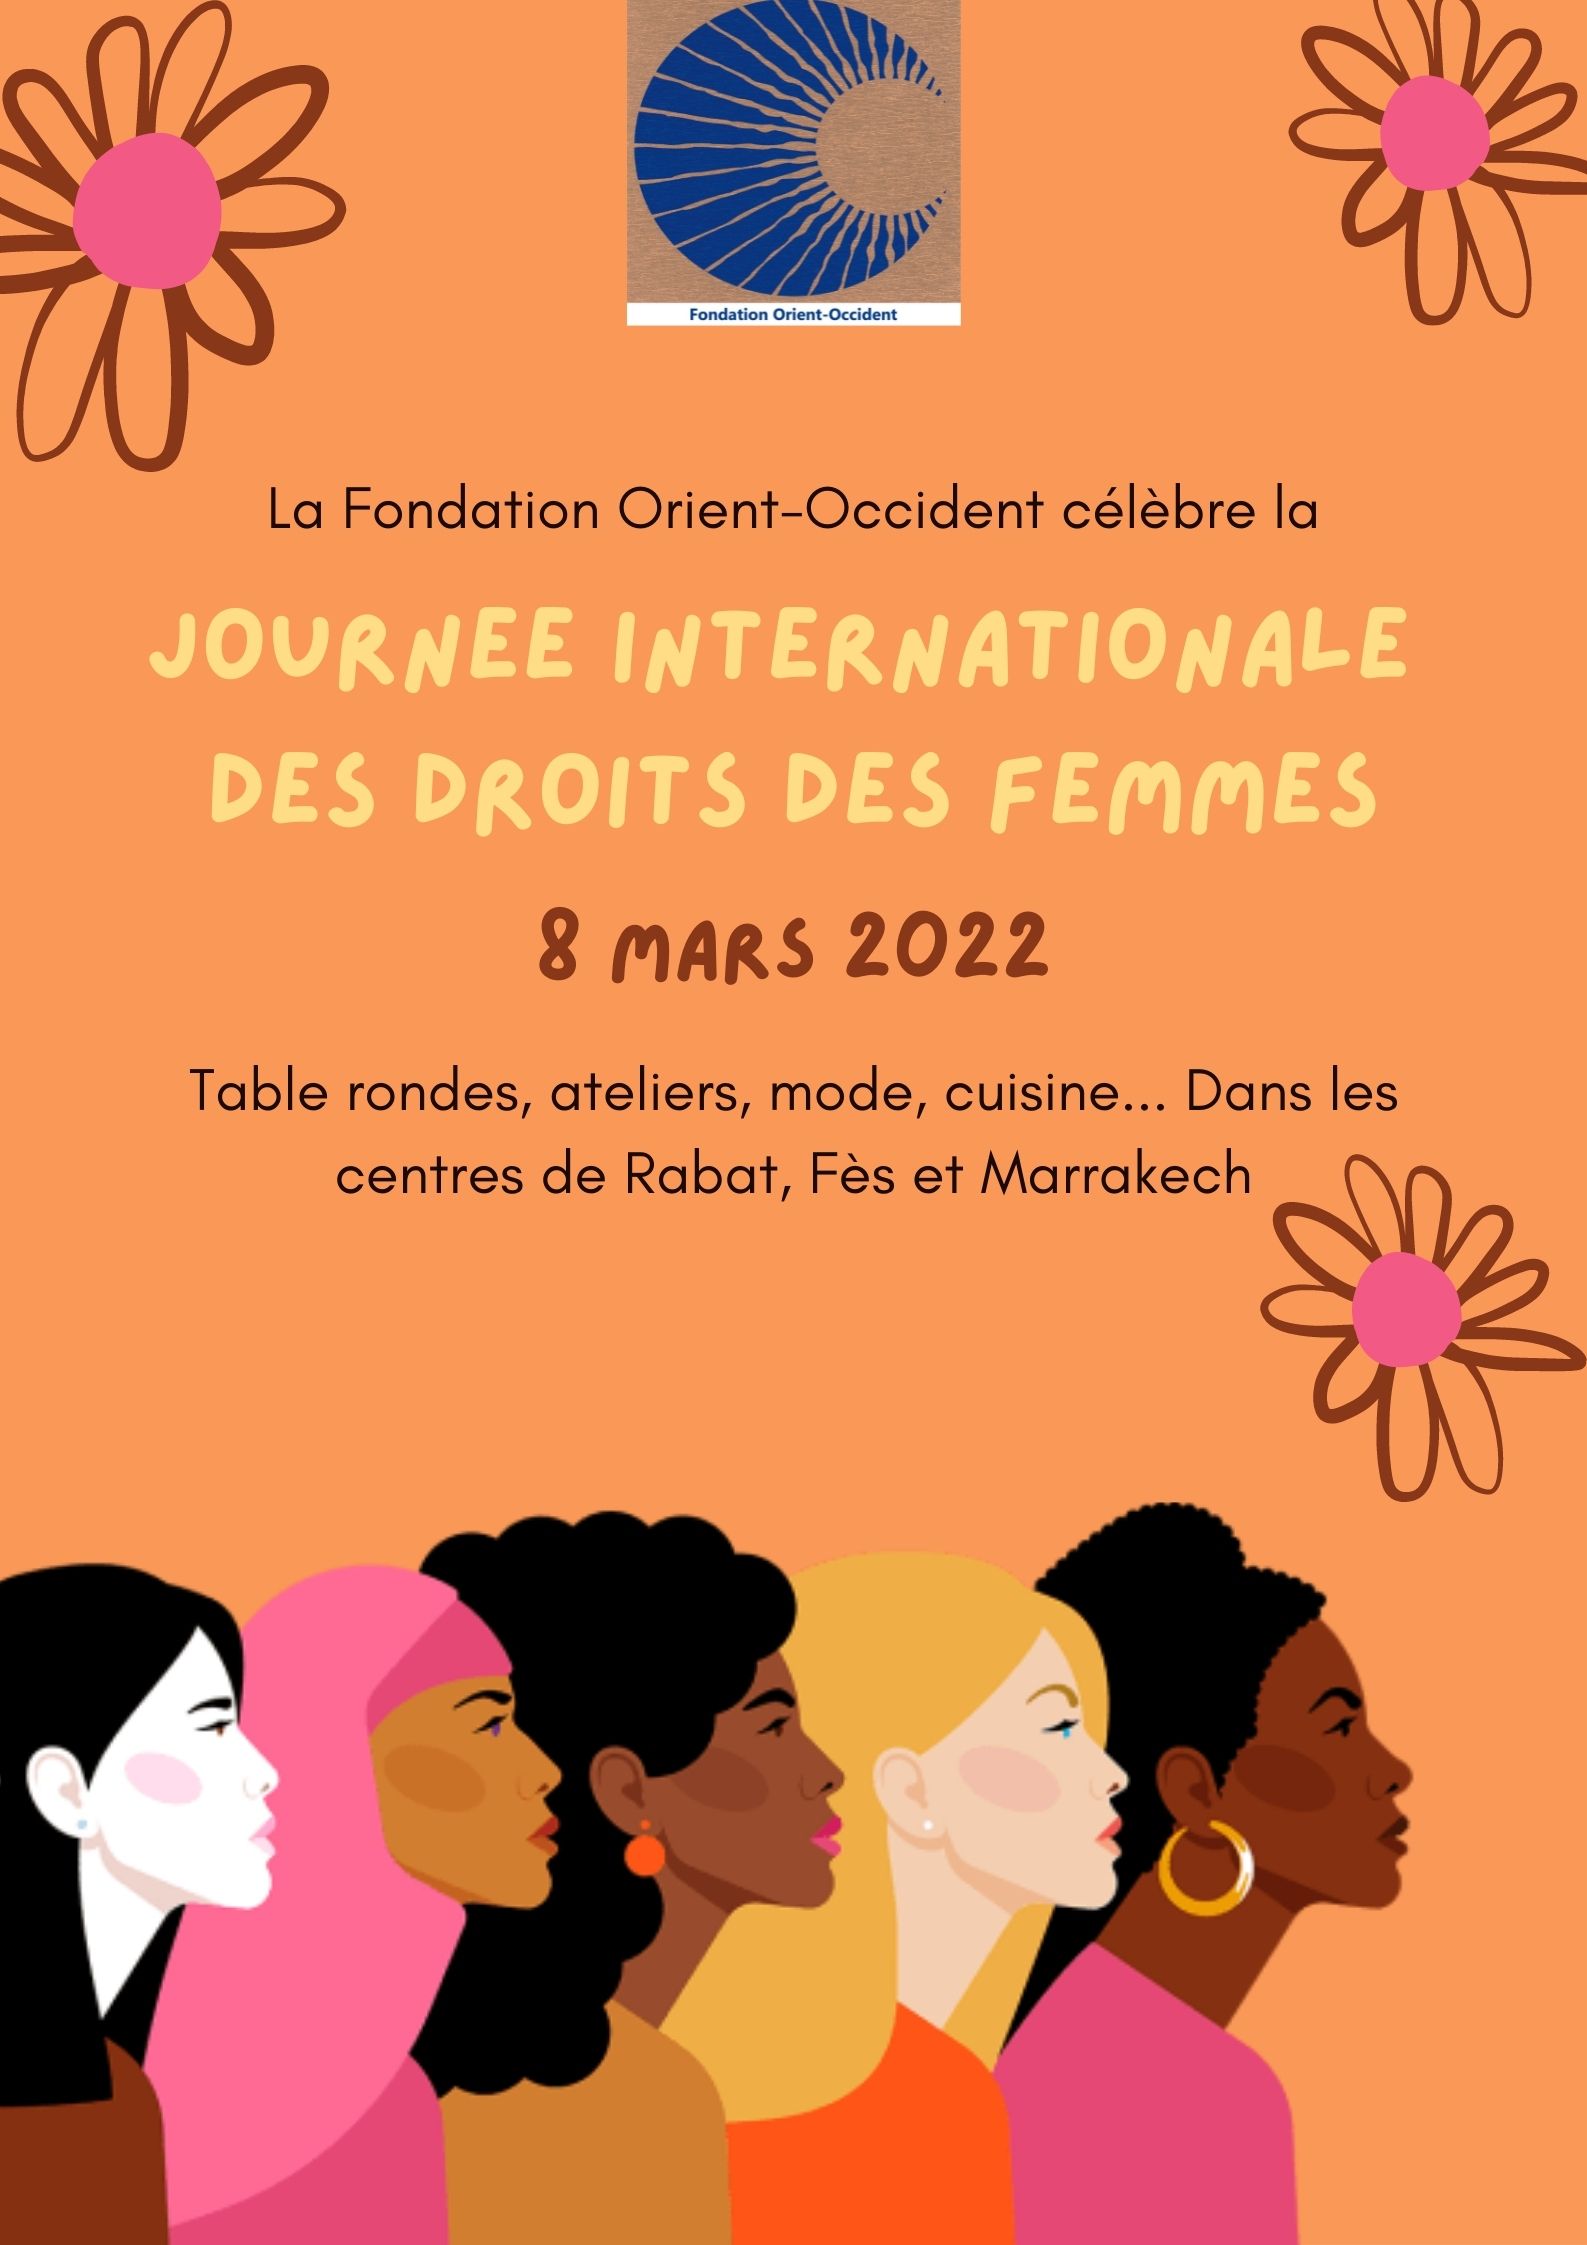 Celebrating the International Women’s day at the Fondation Orient-Occident